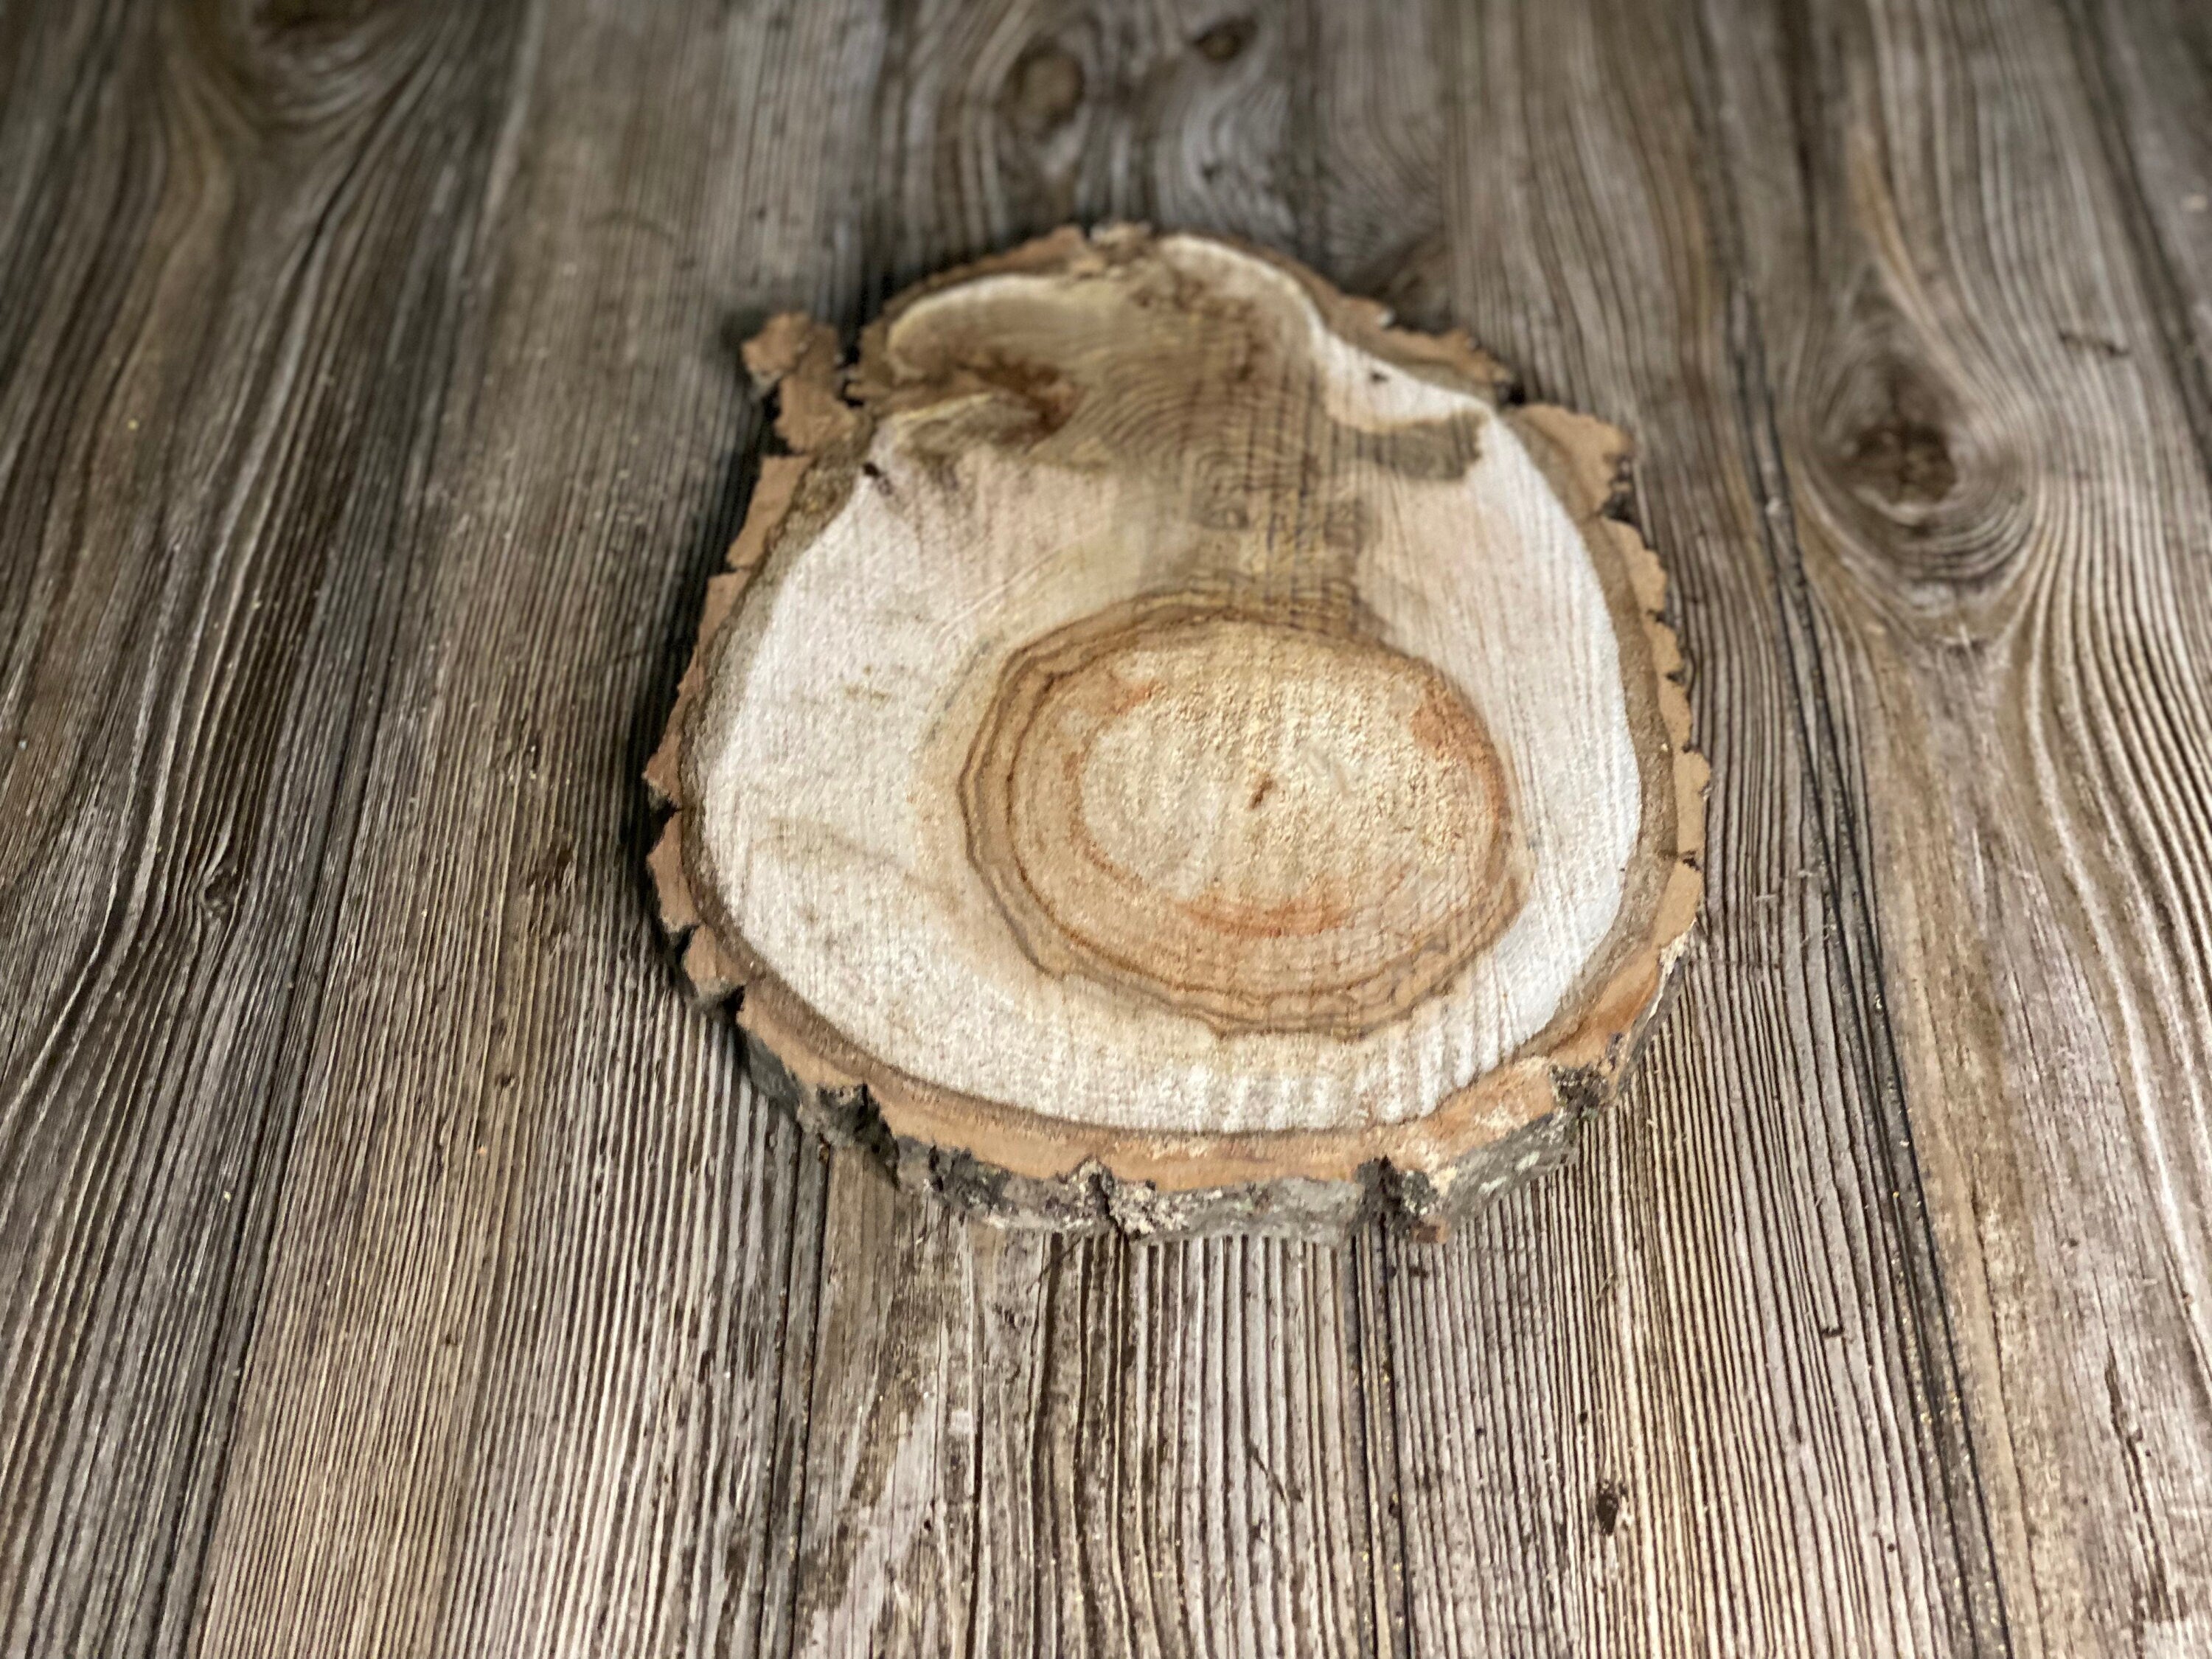 Aspen Burl Slice, Approximately 11 Inches Long by 8 Inches Wide and 3/4 Inch Thick